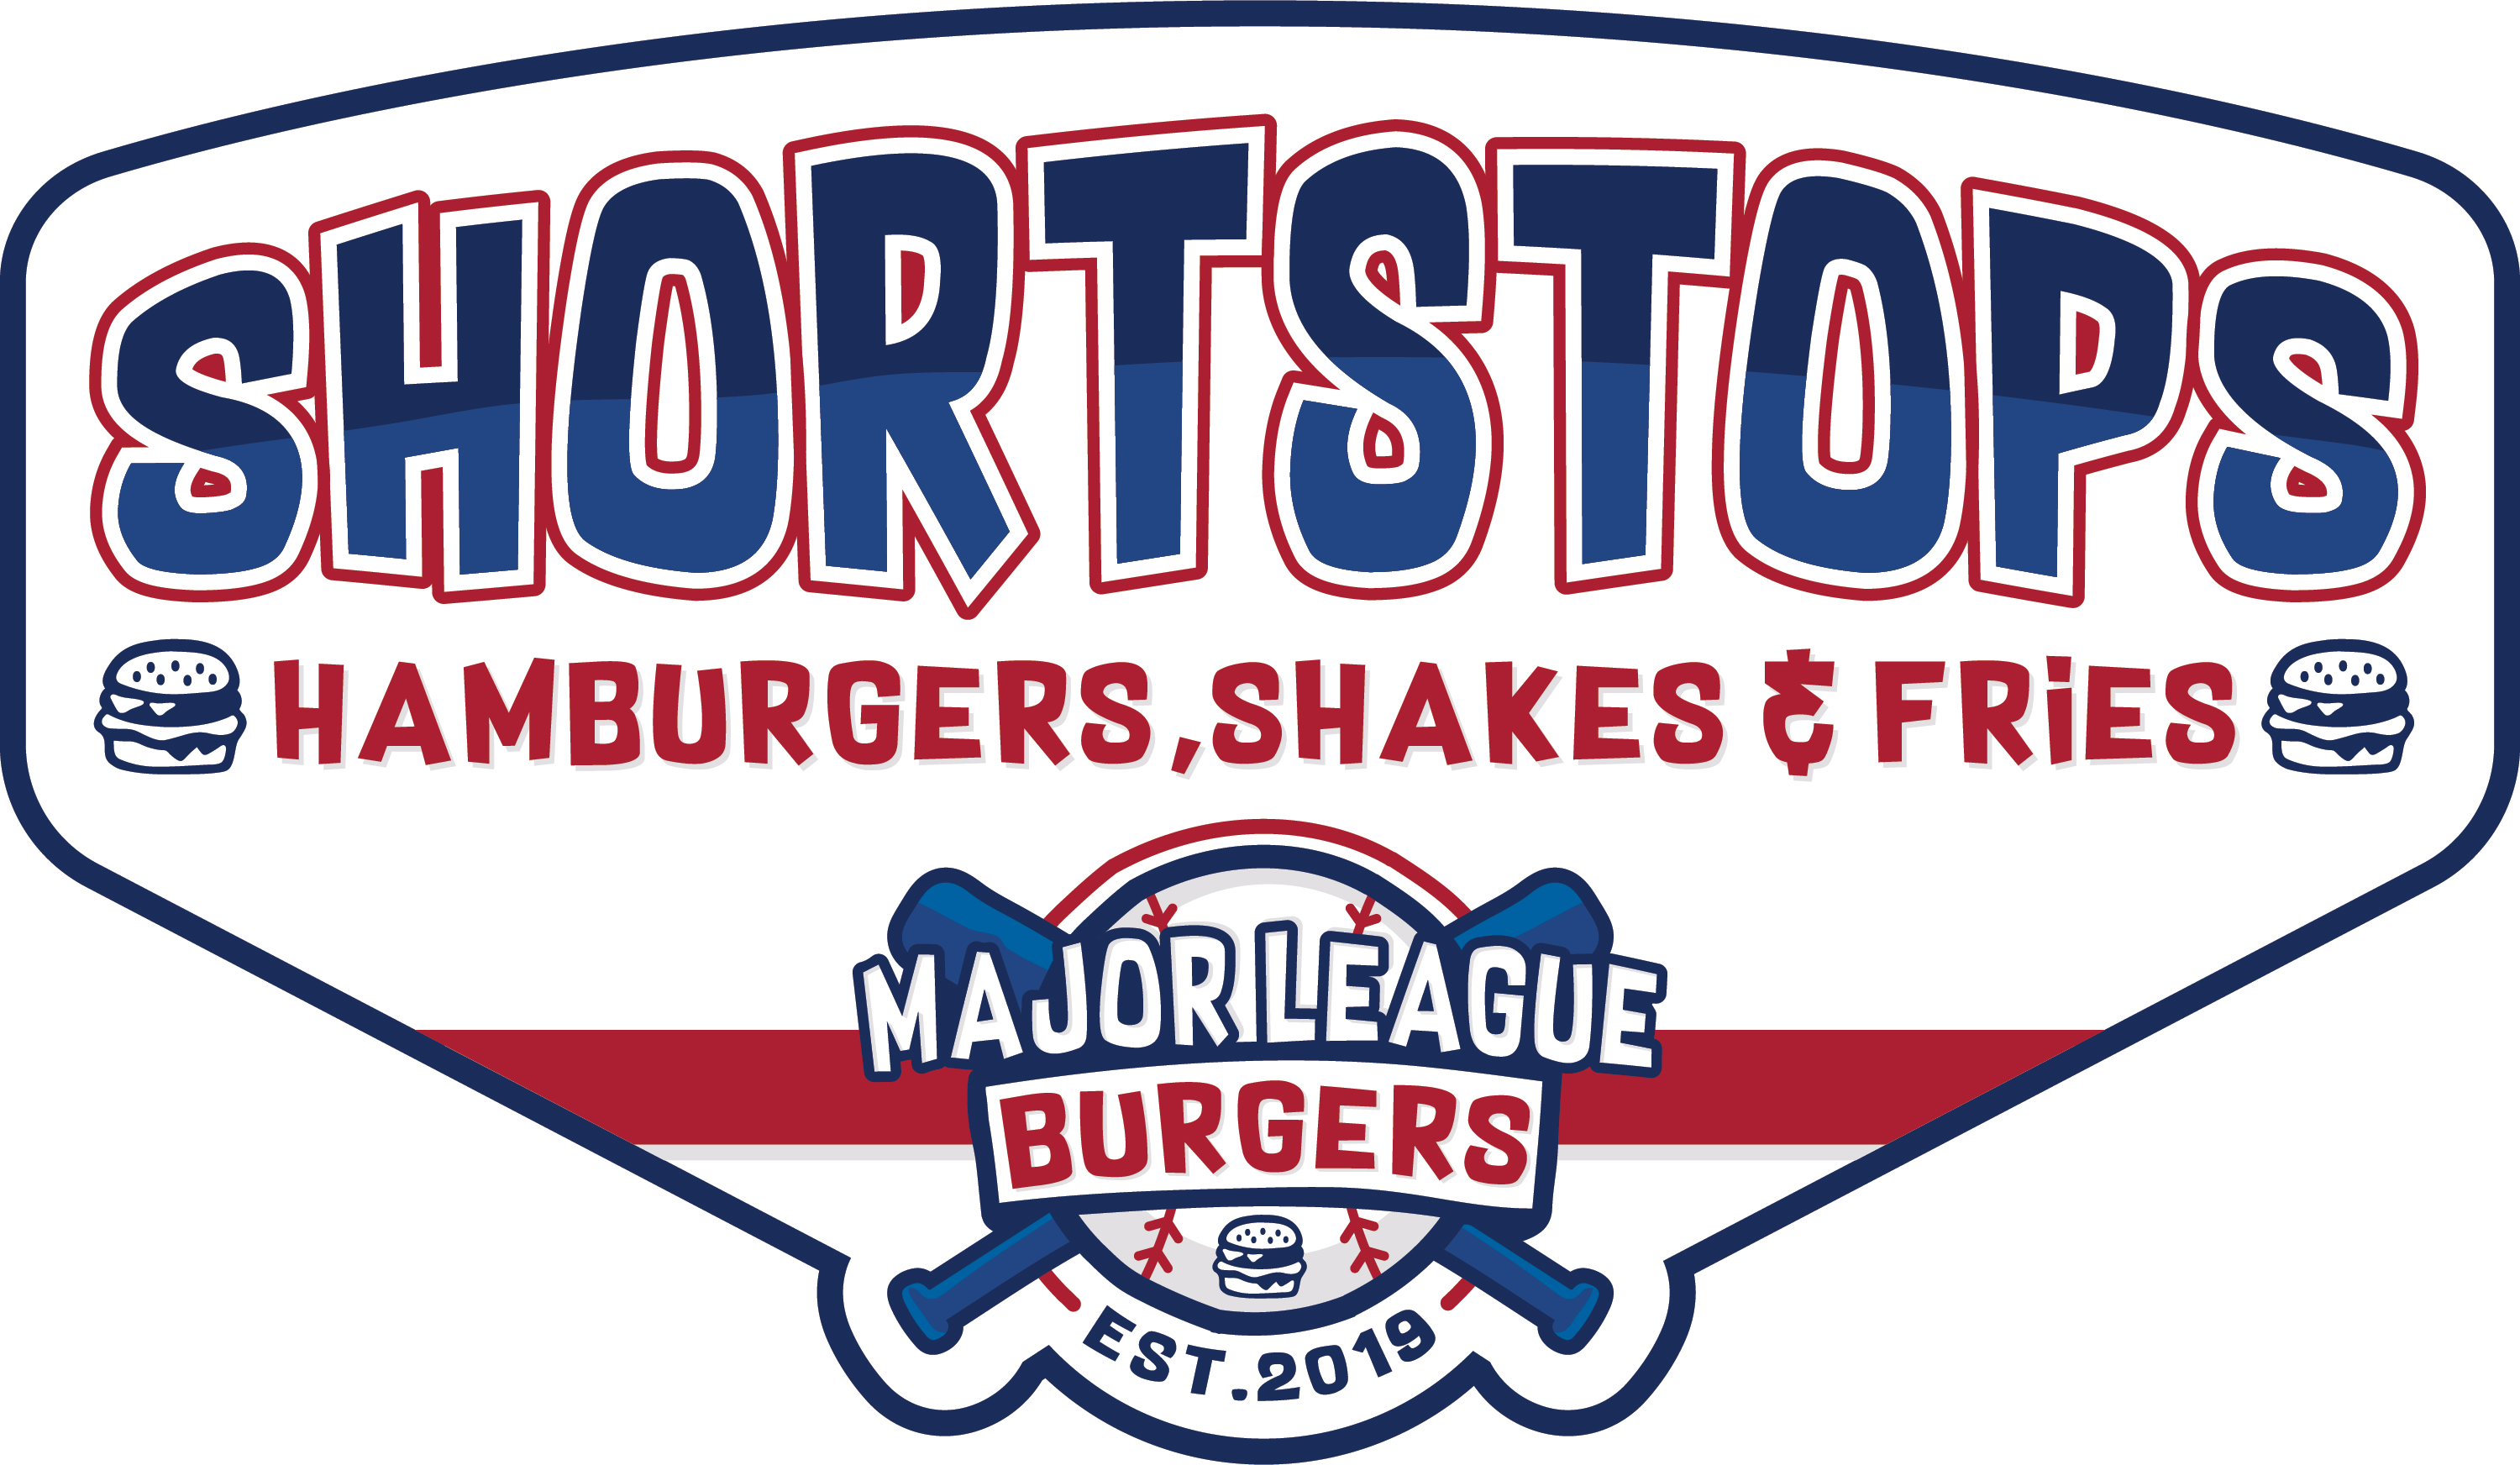 Shortstops Burgers Shakes and Fries